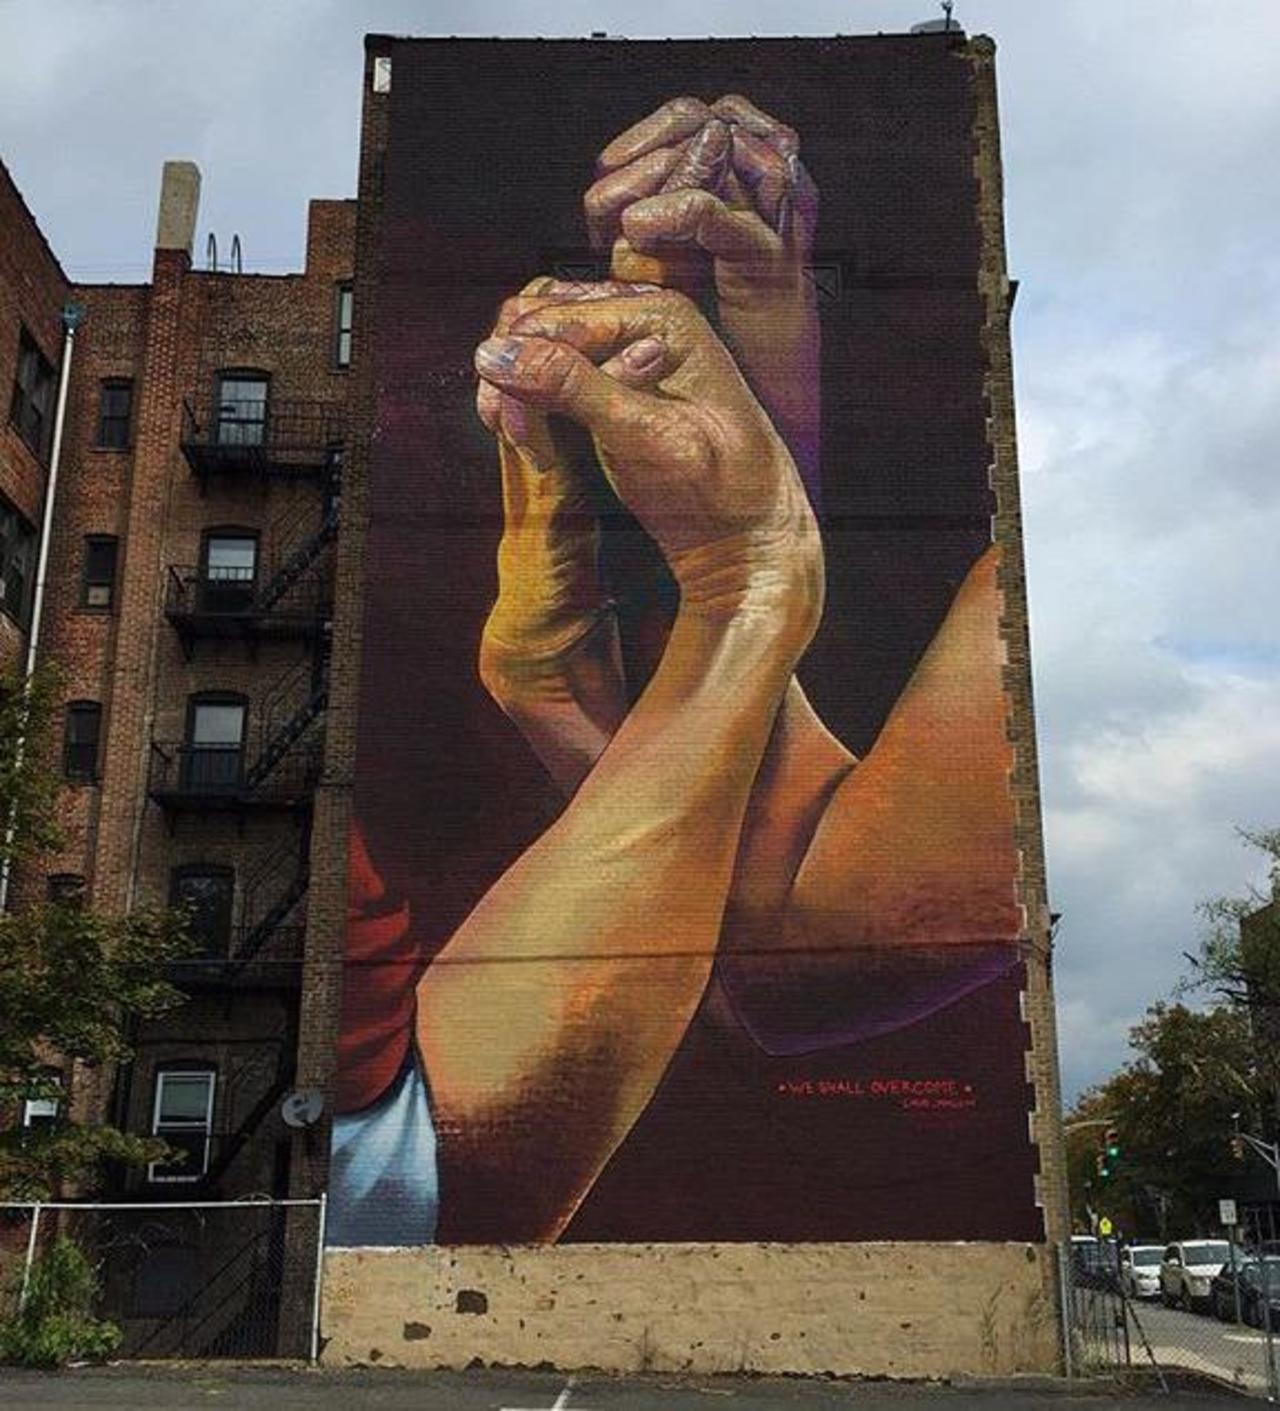 New Street Art by CaseMaclaim in Jersey City for the TheBKcollective 

#art #graffiti #mural #streetart http://t.co/6afGcnFFEp